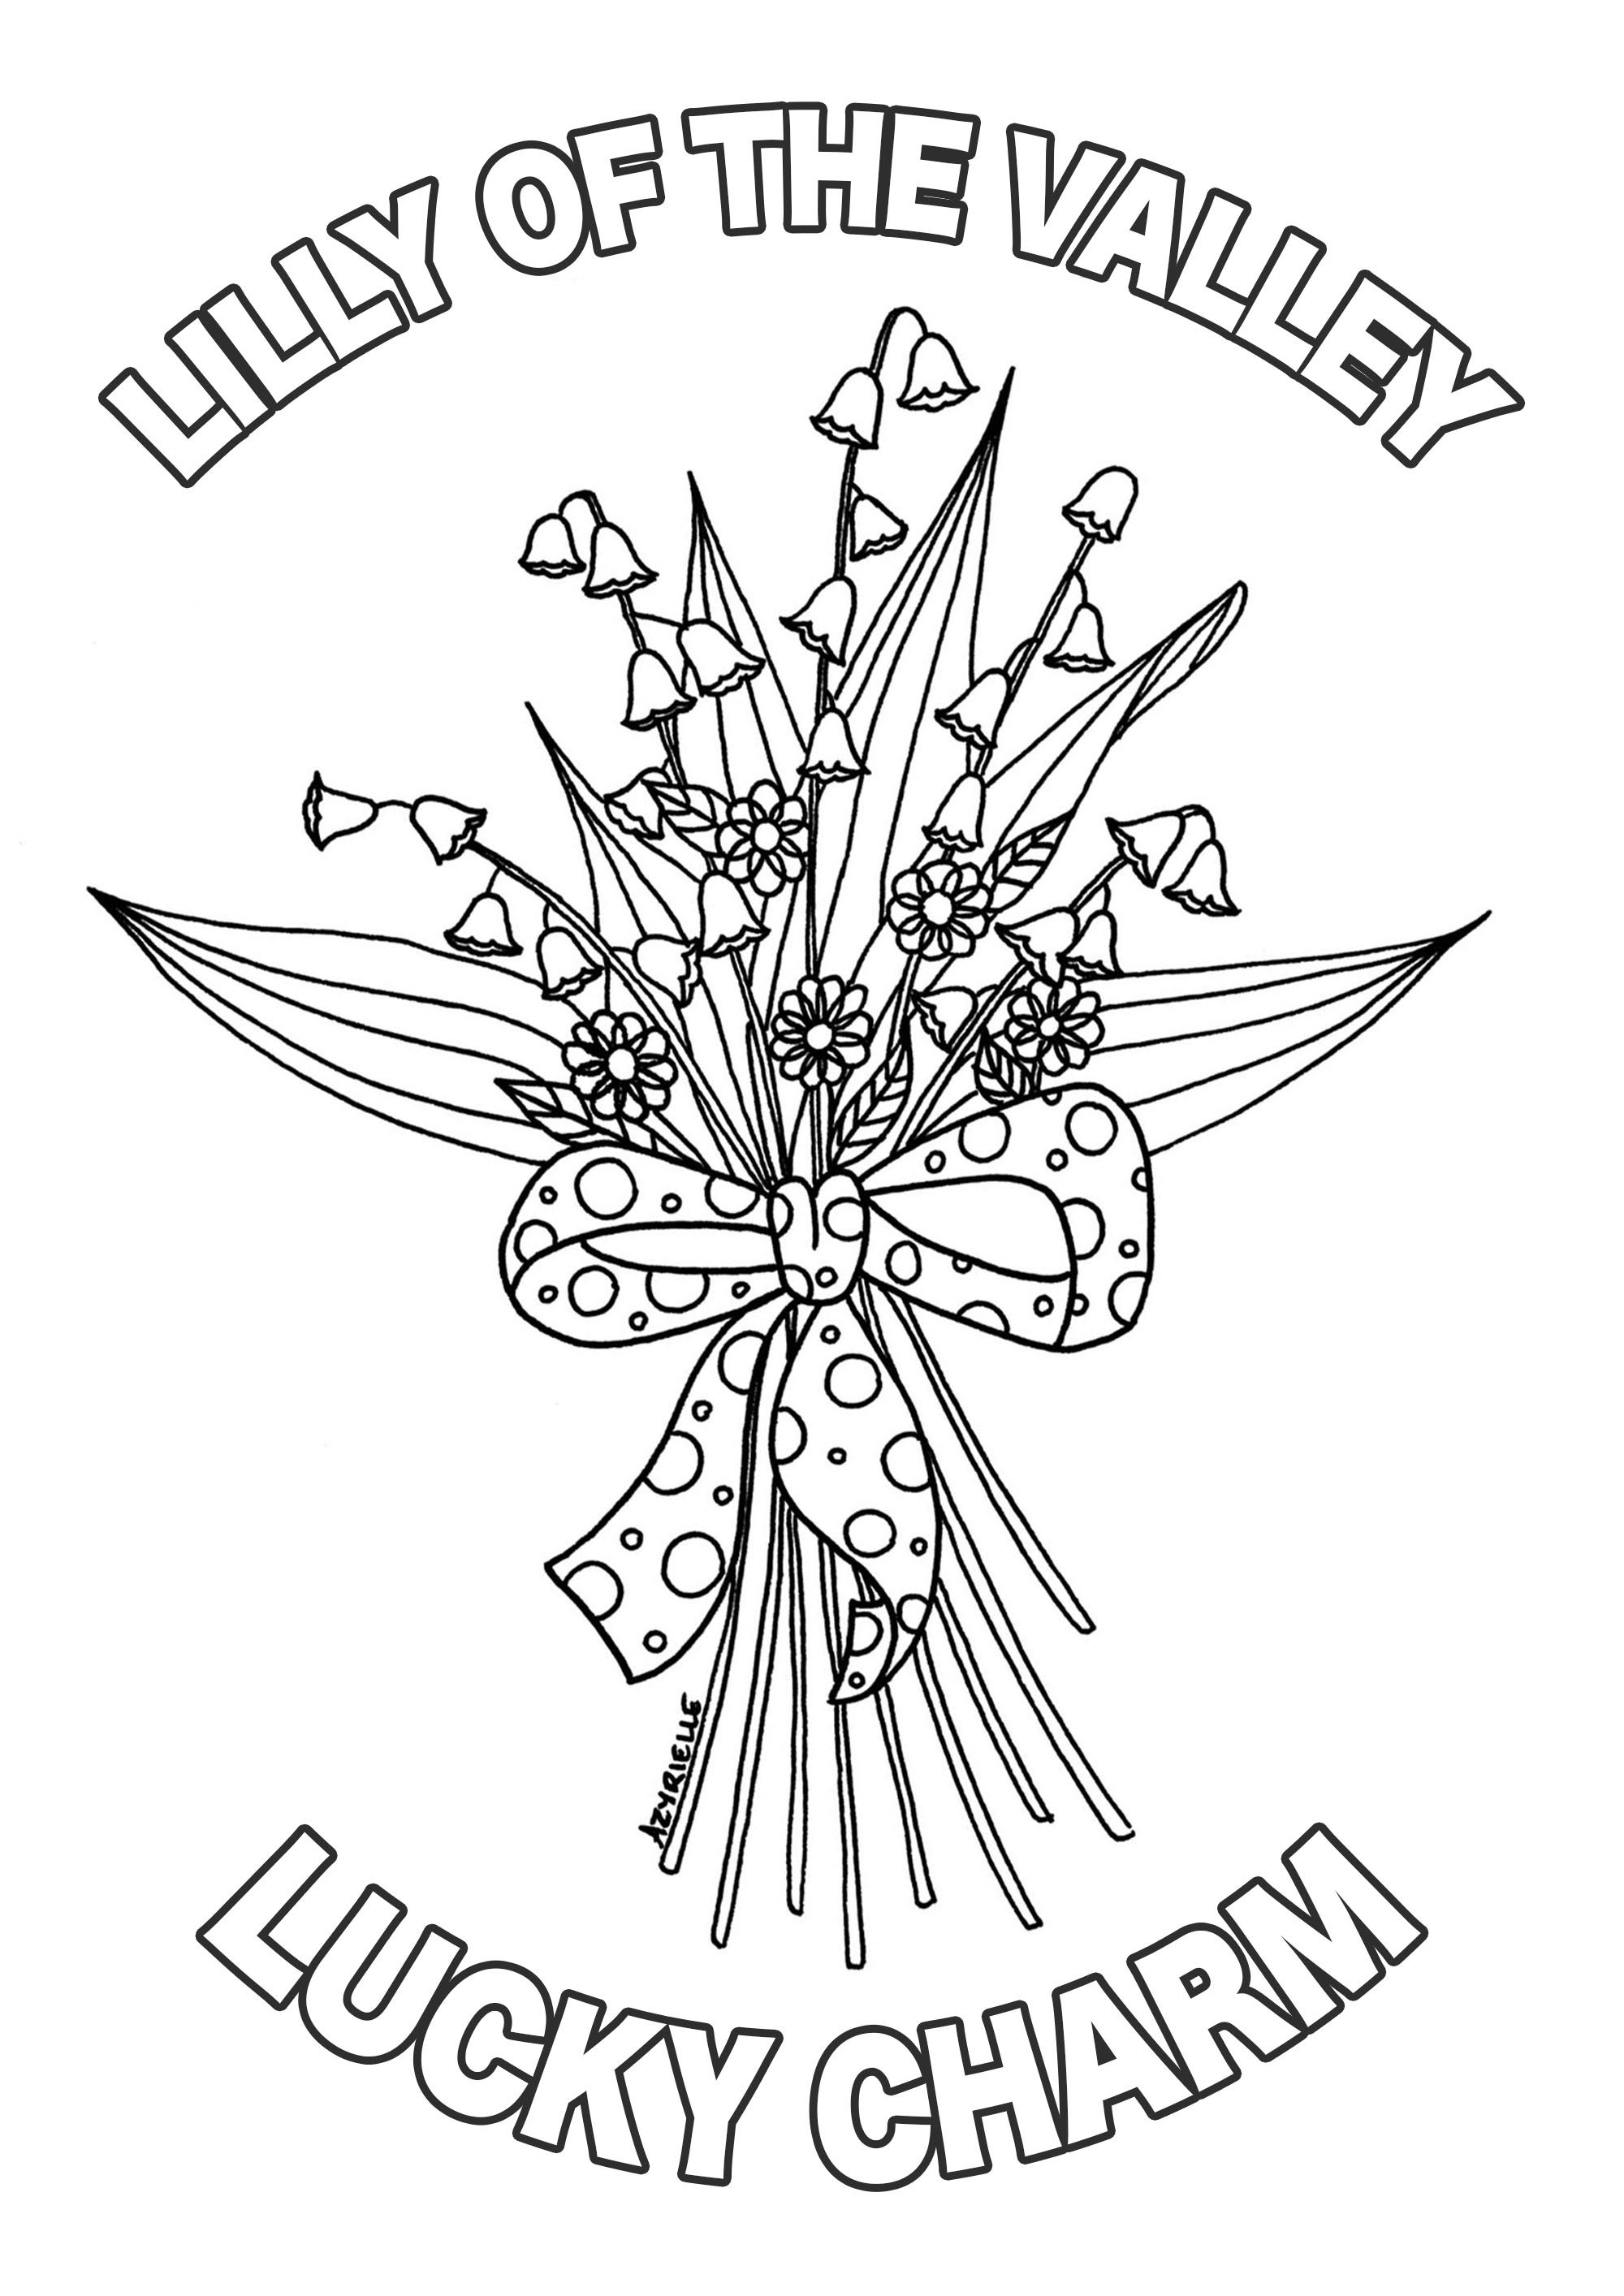 Lilly of the valley : Coloring page with text